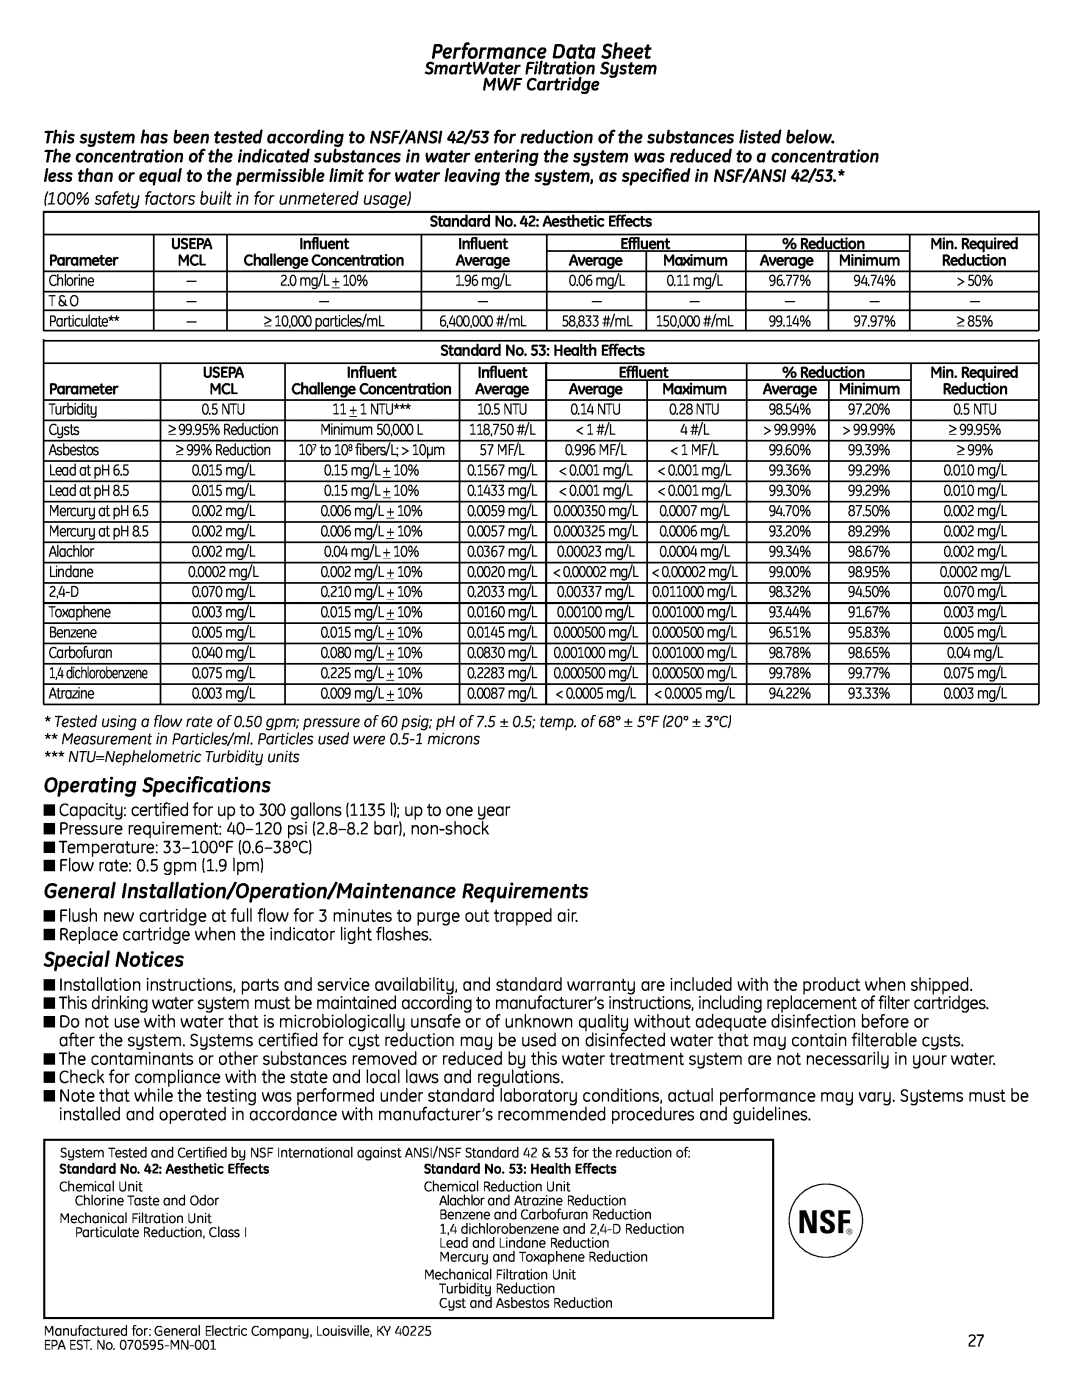 GE Monogram Side-by-Side Built-In Refrigerators Performance Data Sheet, Operating Specifications, Special Notices 